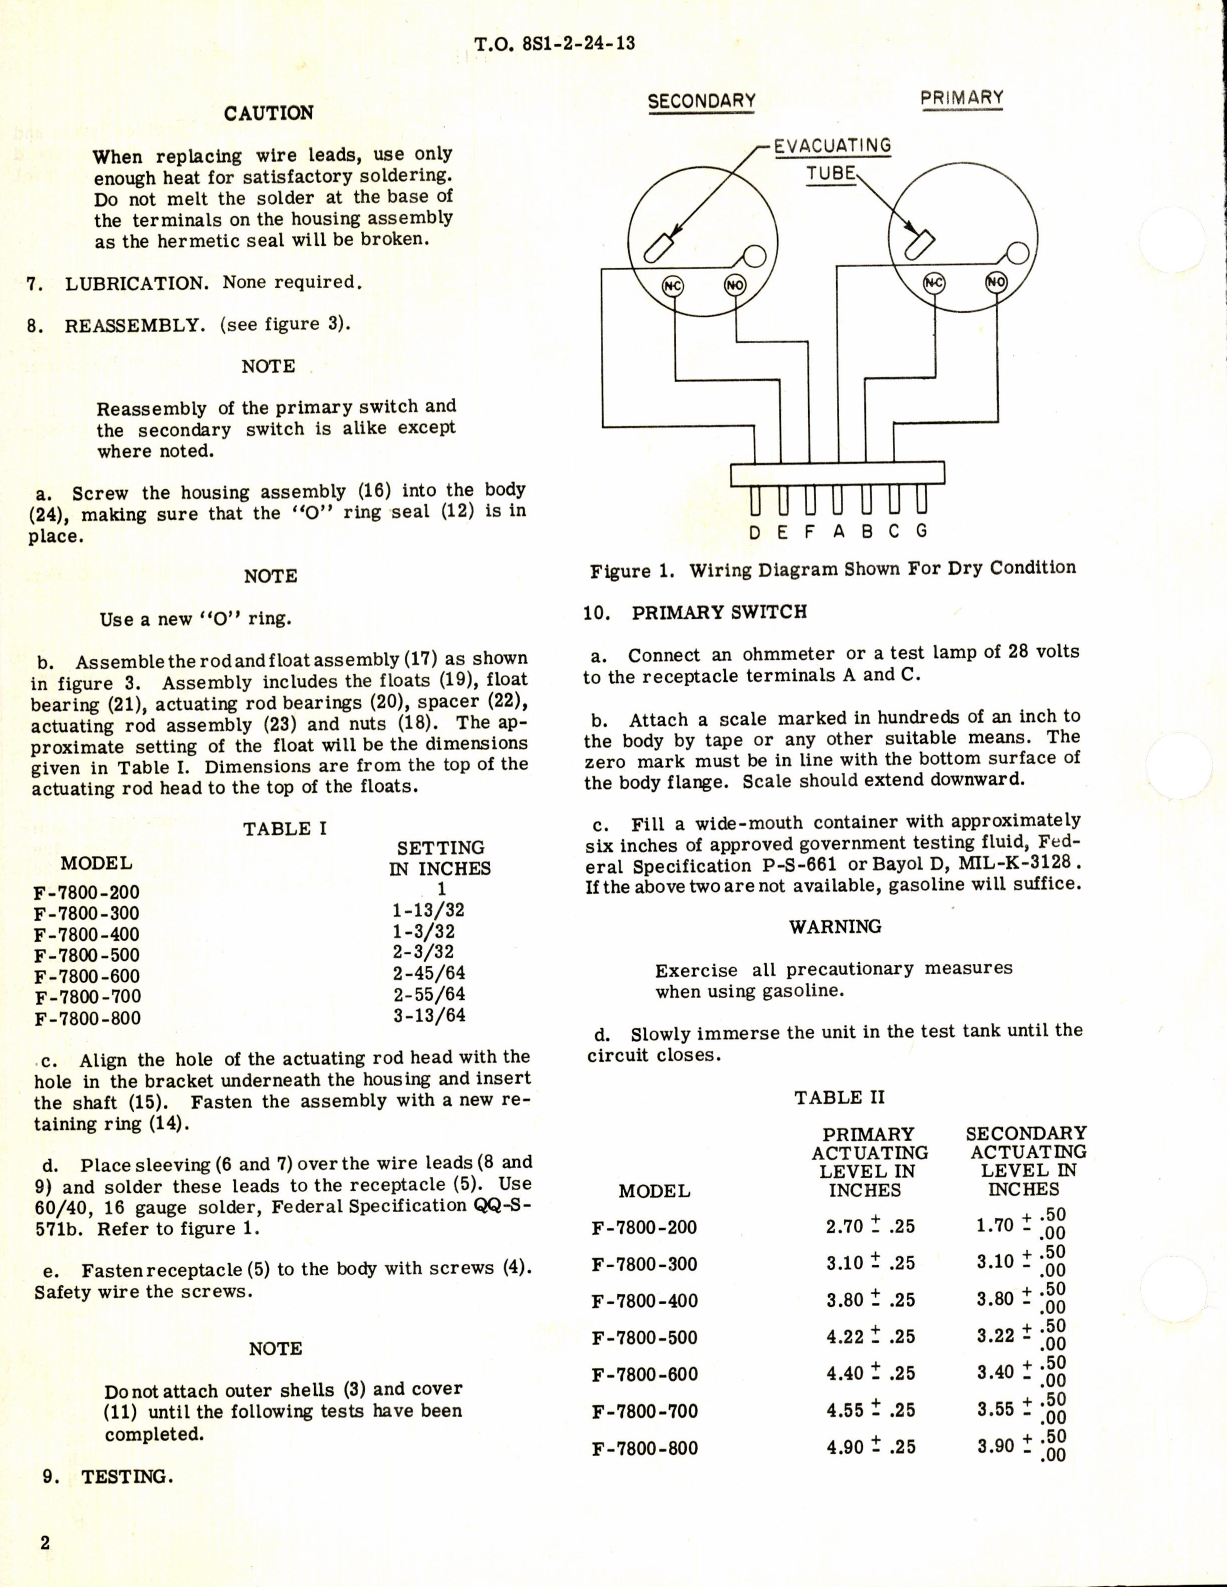 Sample page 2 from AirCorps Library document: Overhaul Instructions with Parts Breakdown for Switch Assembly, Dual Float